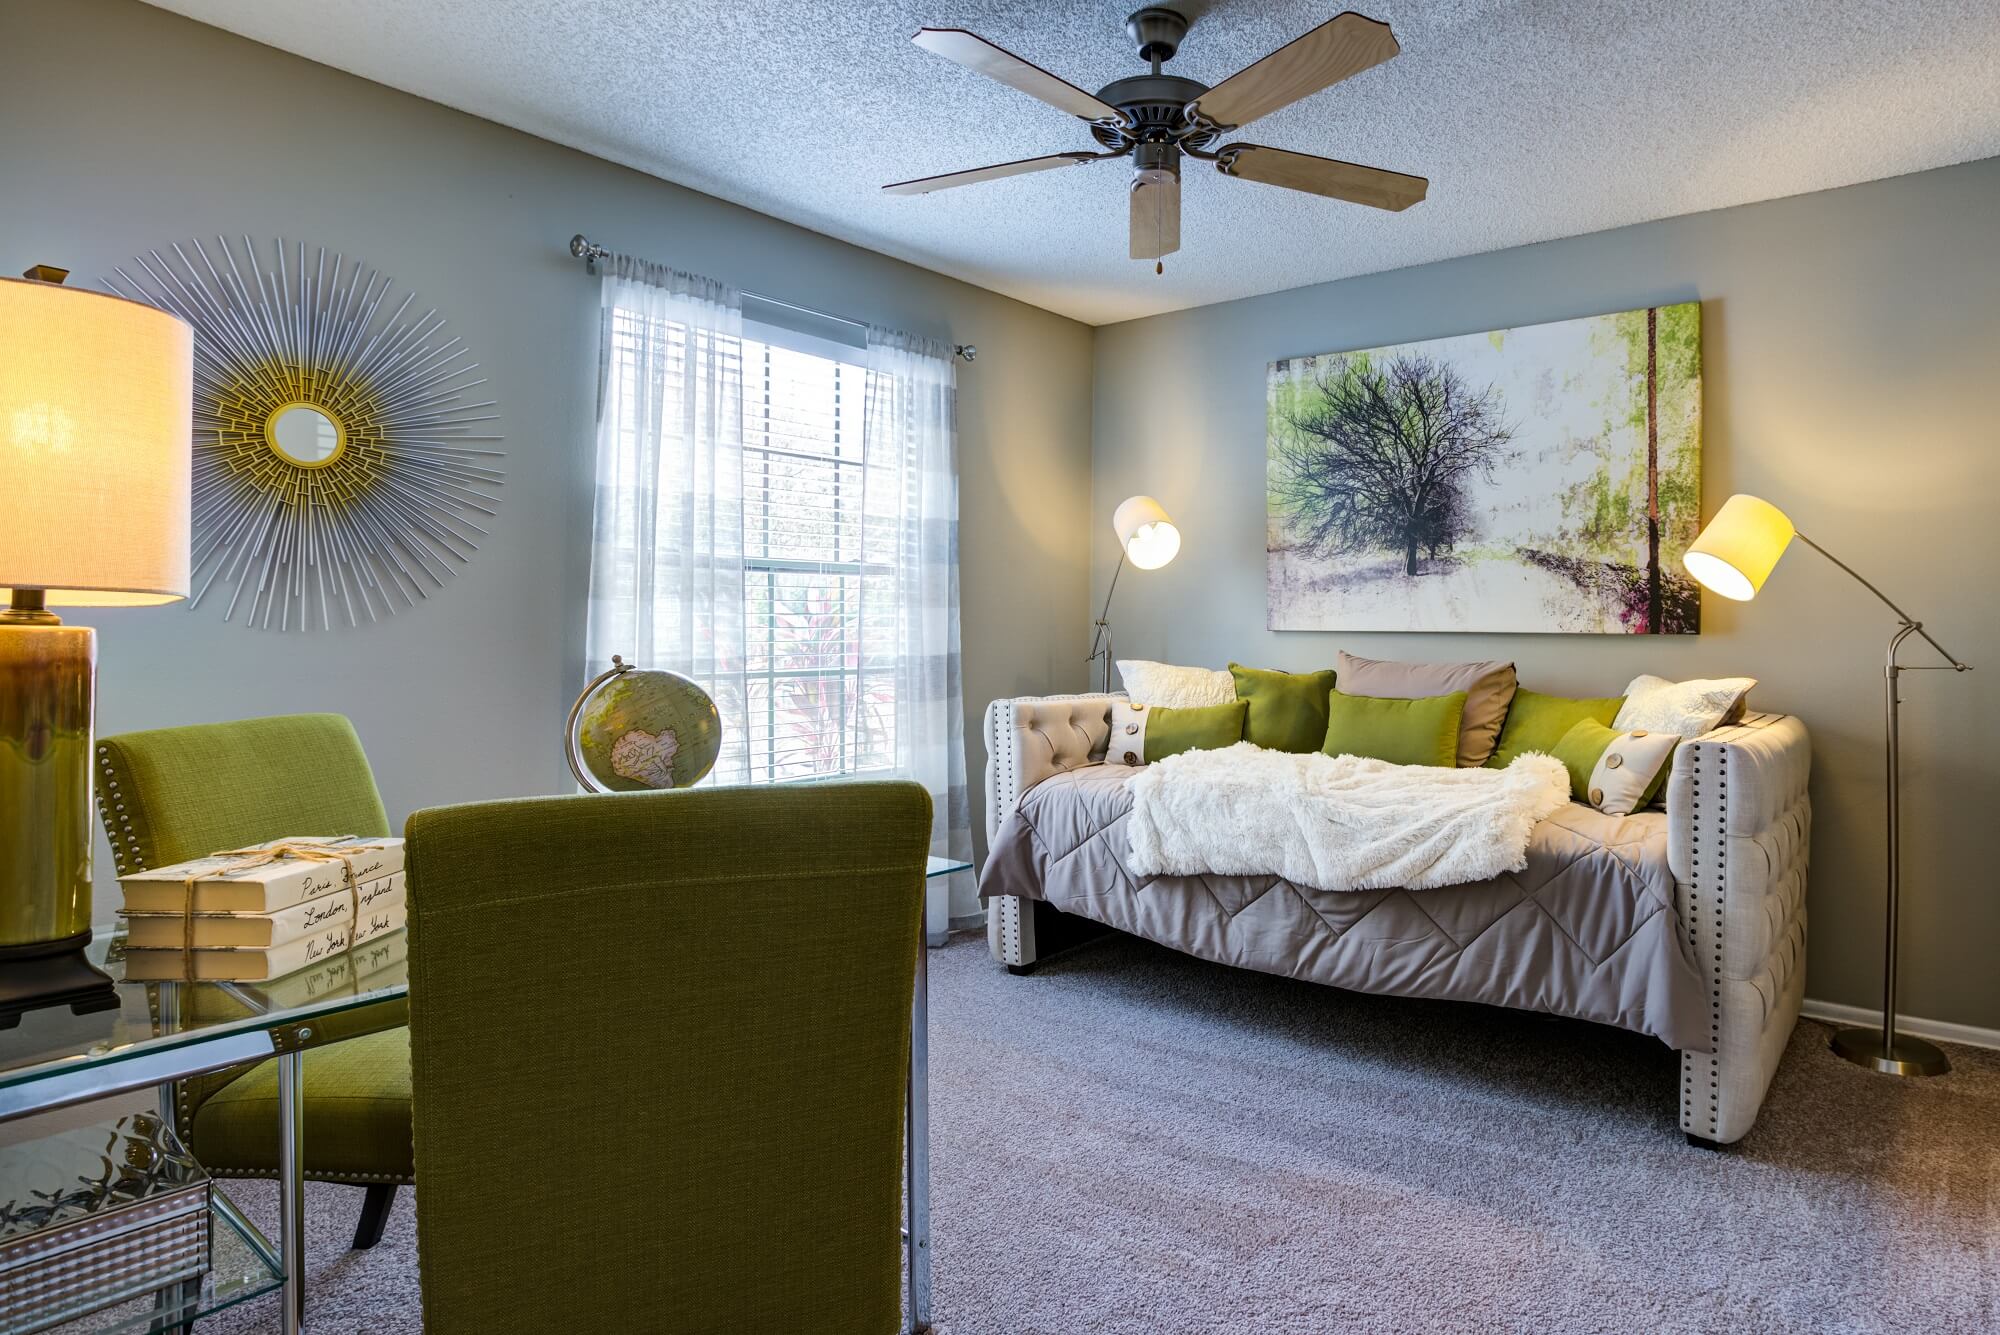 bedroom with large window, ceiling fan, and decor.